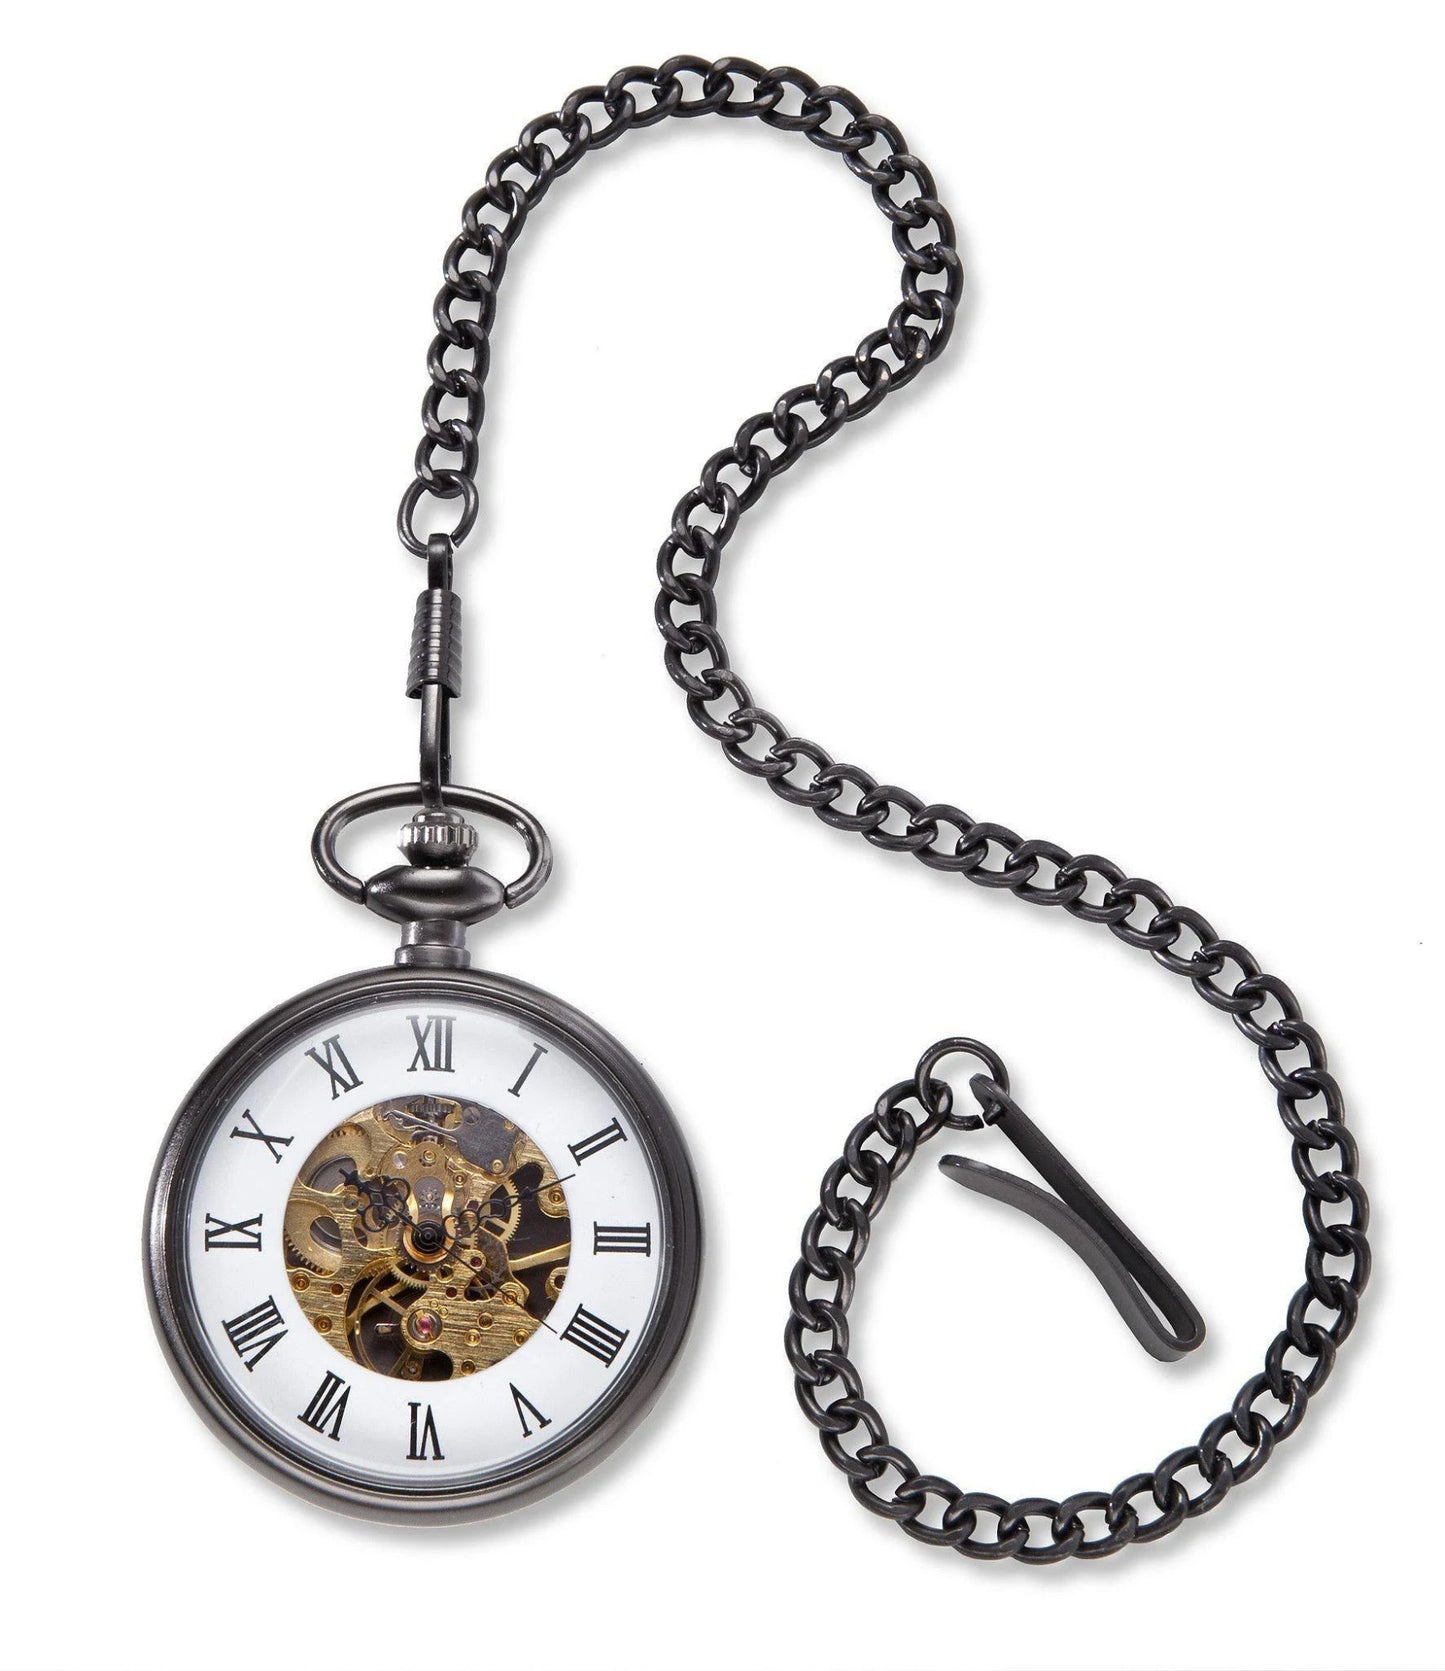 To My Man Open Face Pocket Watch